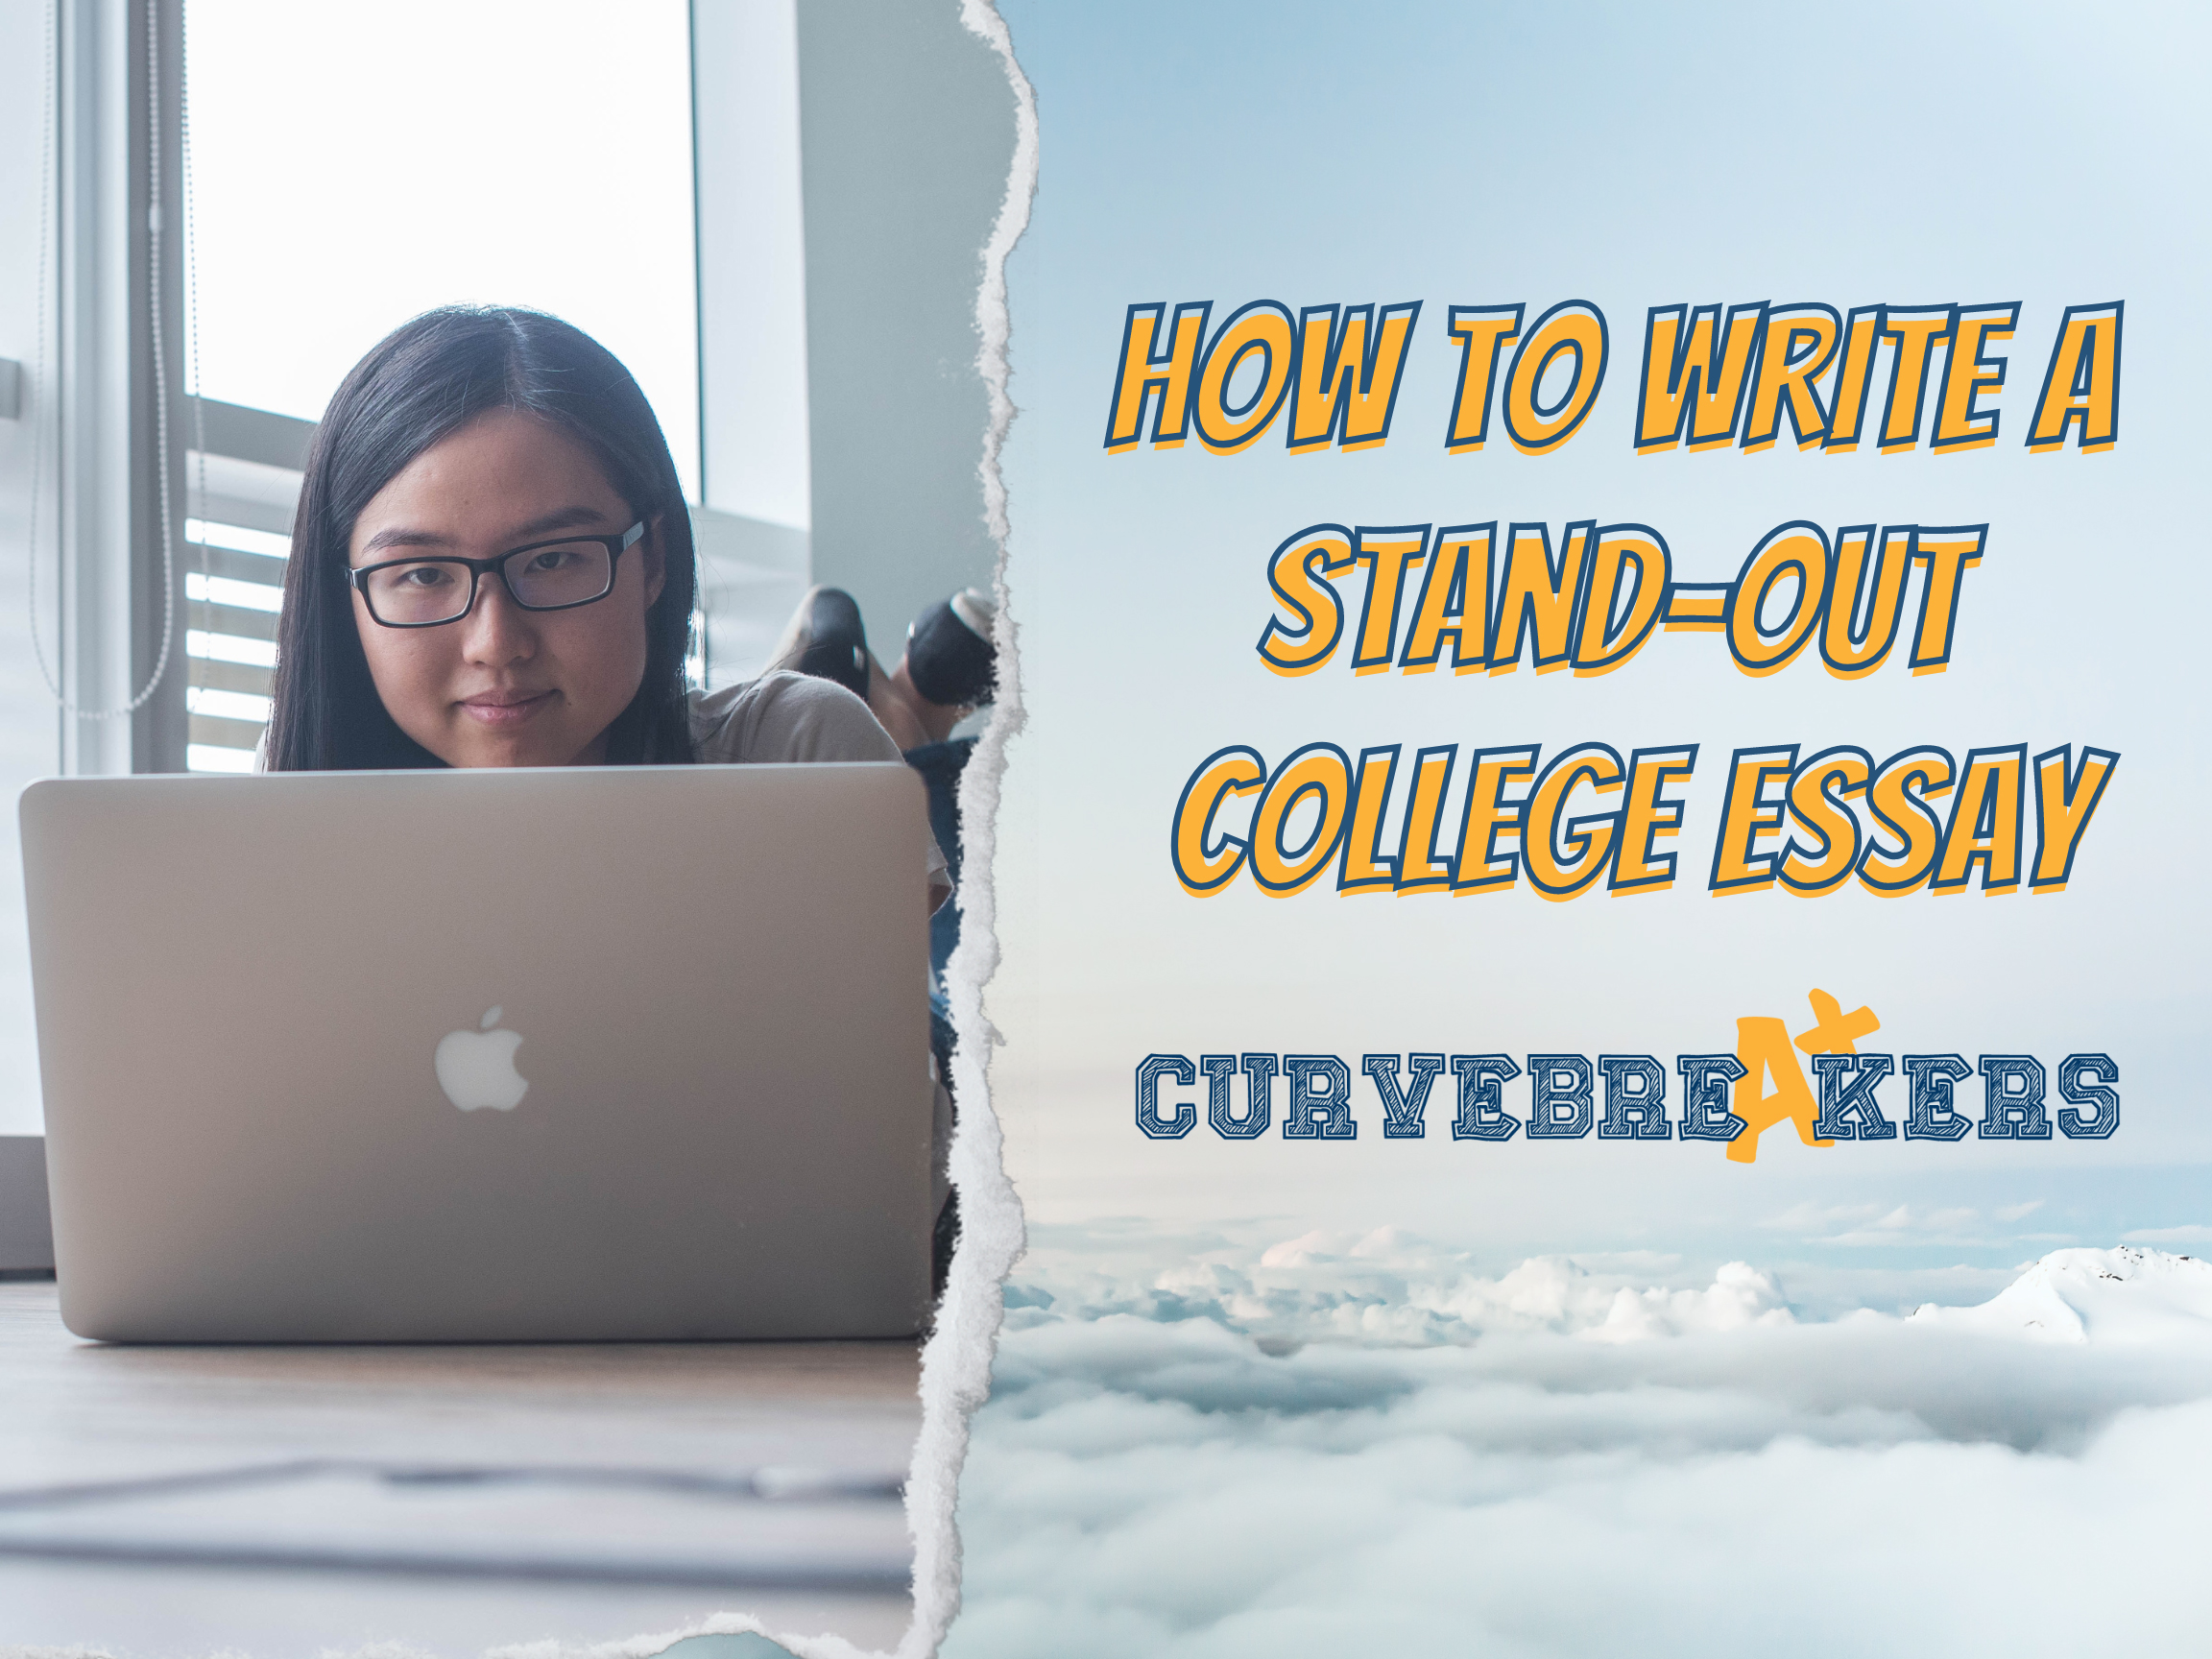 Stand-Out with Your College Essay on your college application